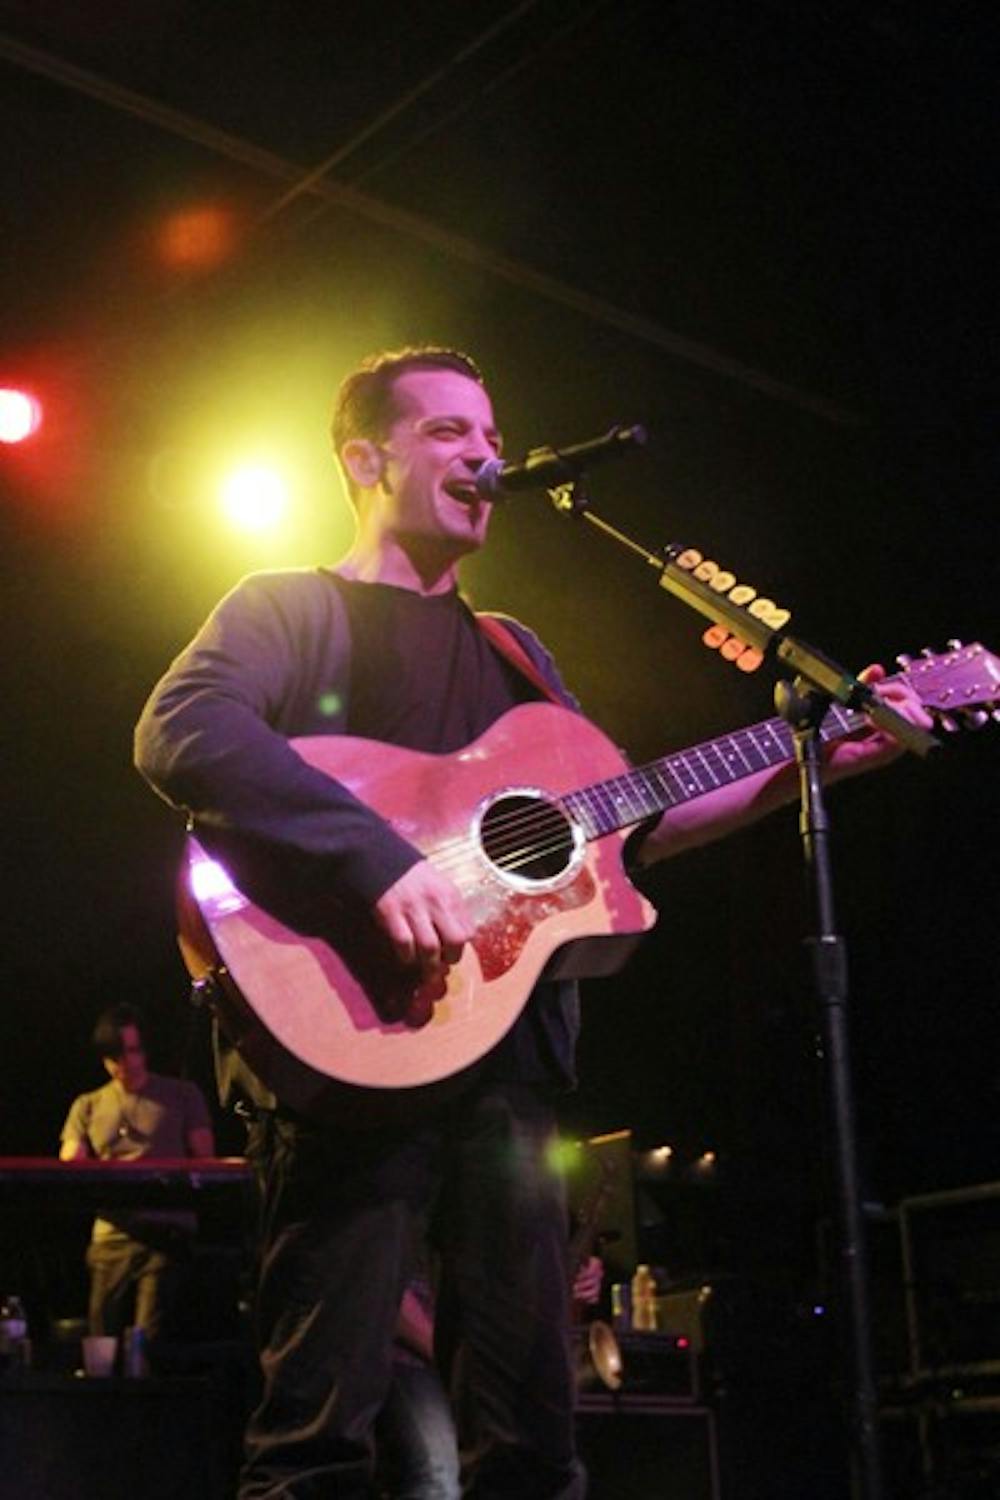 Rock band O.A.R. performs Jan. 25 at the Marquee Theatre in Tempe. (Photo by Lisa Bartoli)